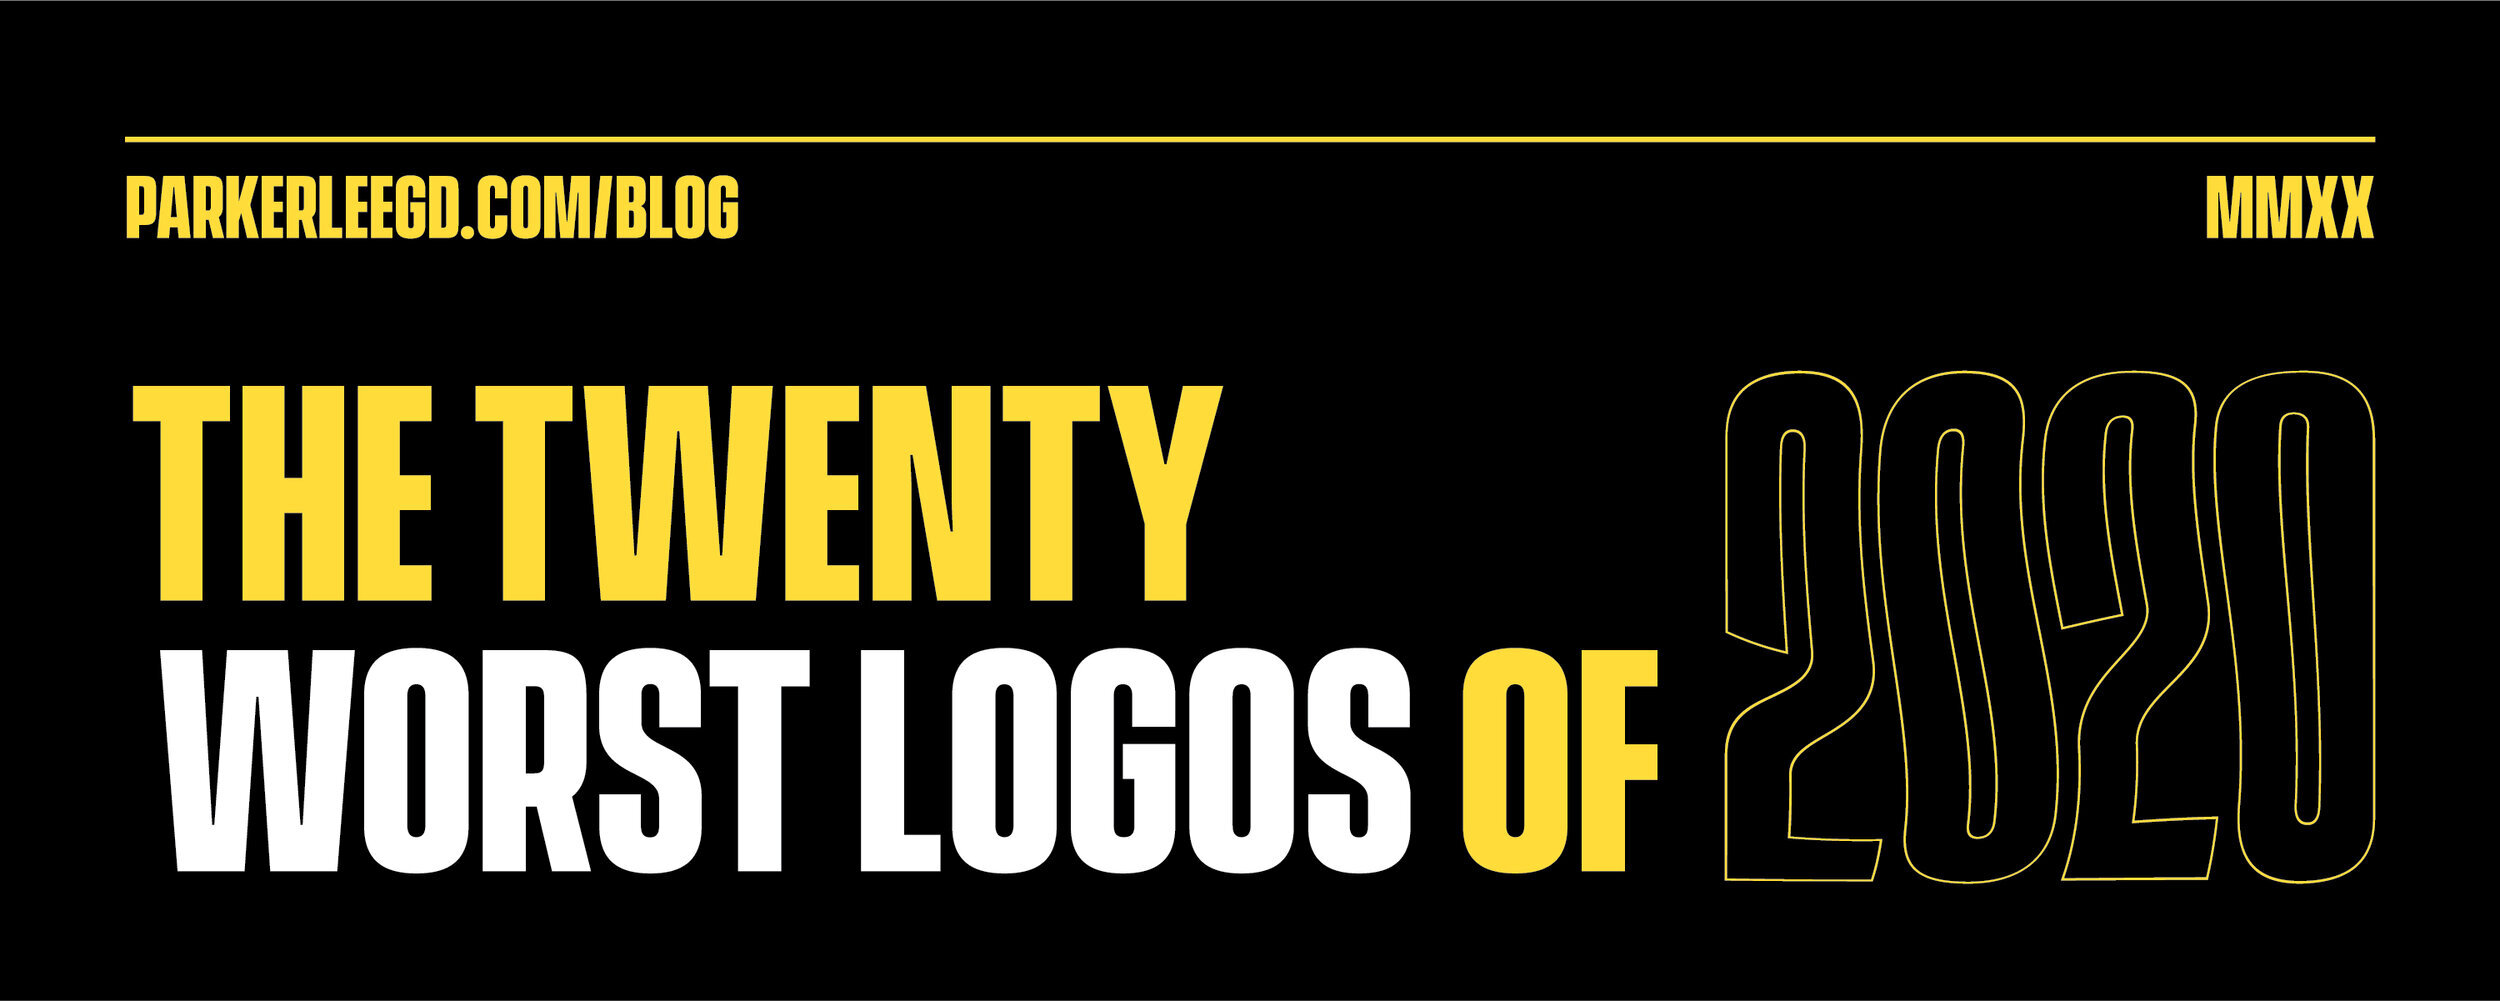 5 Logos That Ruined Perfectly Good Watches – Or Did They?